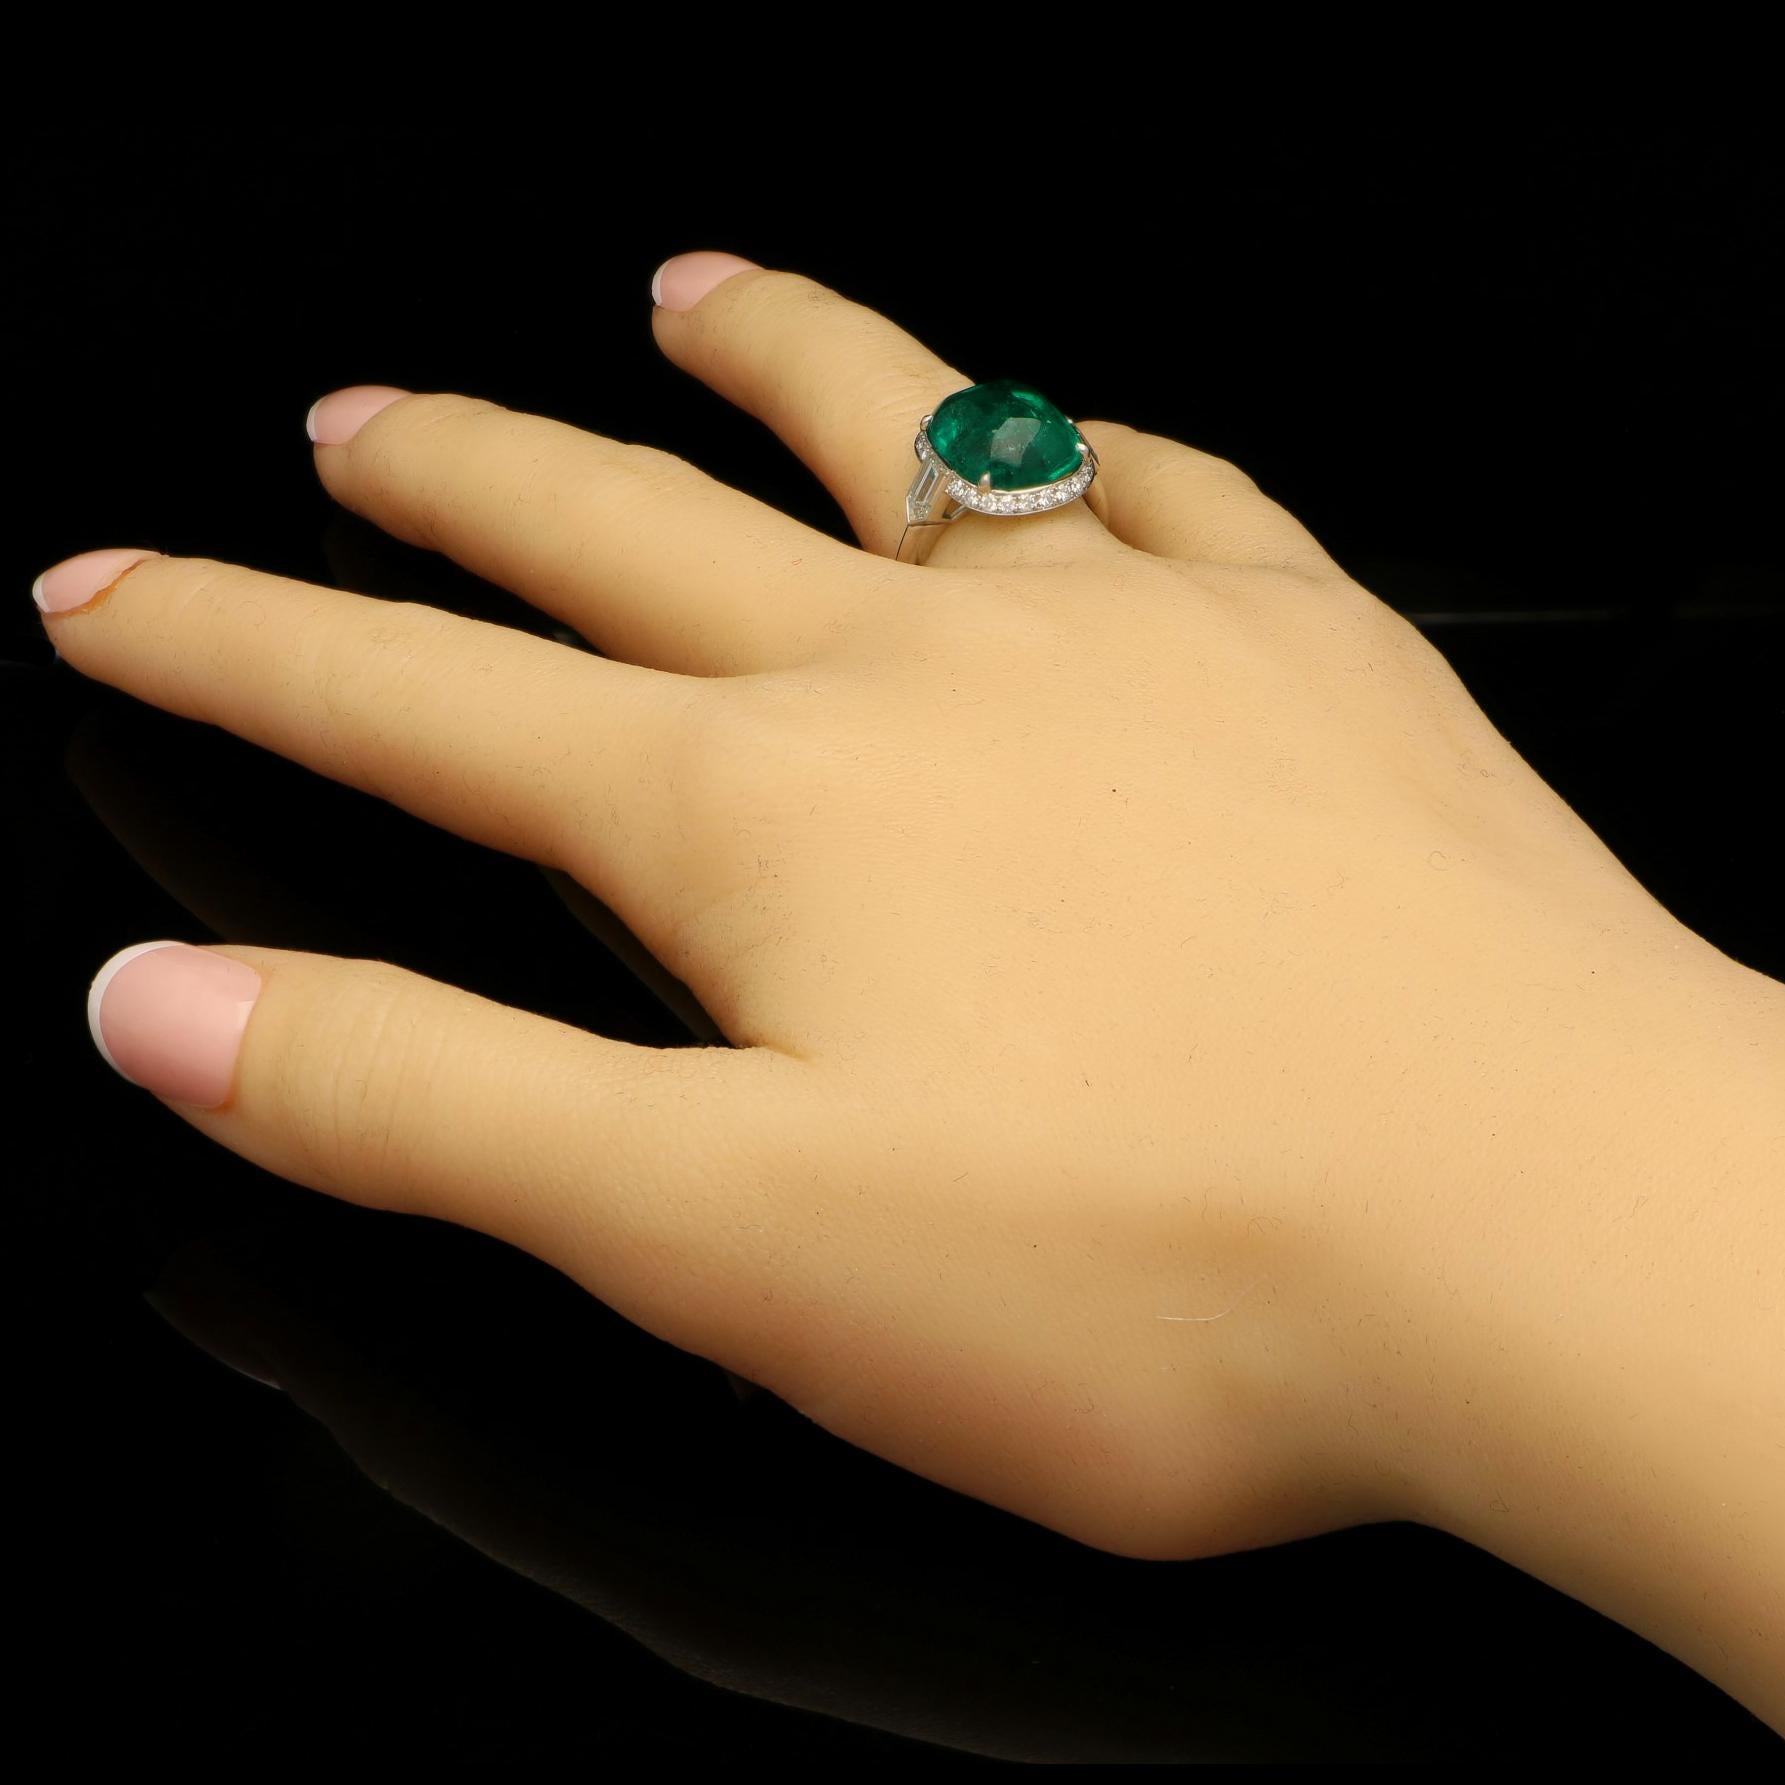 Contemporary 8.59 Carat Sugar Loaf Cabochon Colombian Emerald Ring with Diamond Halo